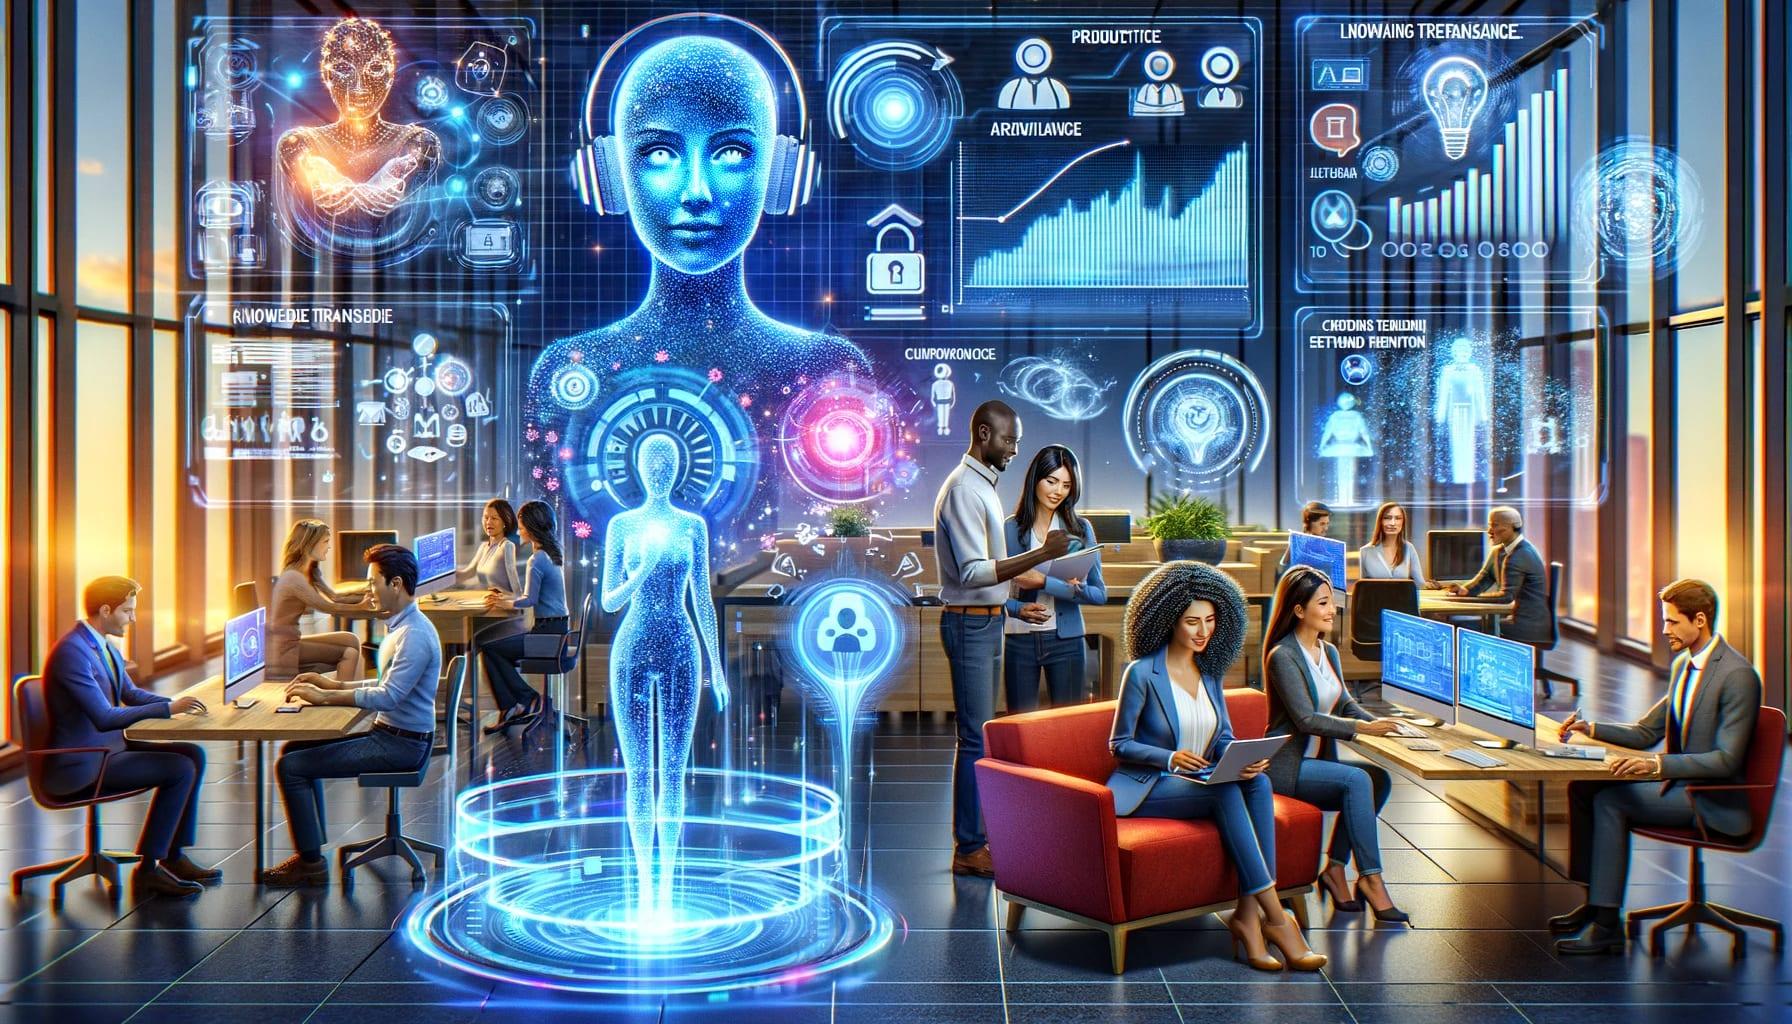 Futuristic office environment showcasing a diverse team of professionals working with advanced technology, including interactive AI holograms and high-tech data analytics. This vibrant image depicts a high-tech workplace with collaborative spaces, digital interfaces for business analytics, and the seamless integration of artificial intelligence in corporate settings. Ideal for articles related to the future of work, AI in business, and the digital transformation of modern office spaces.